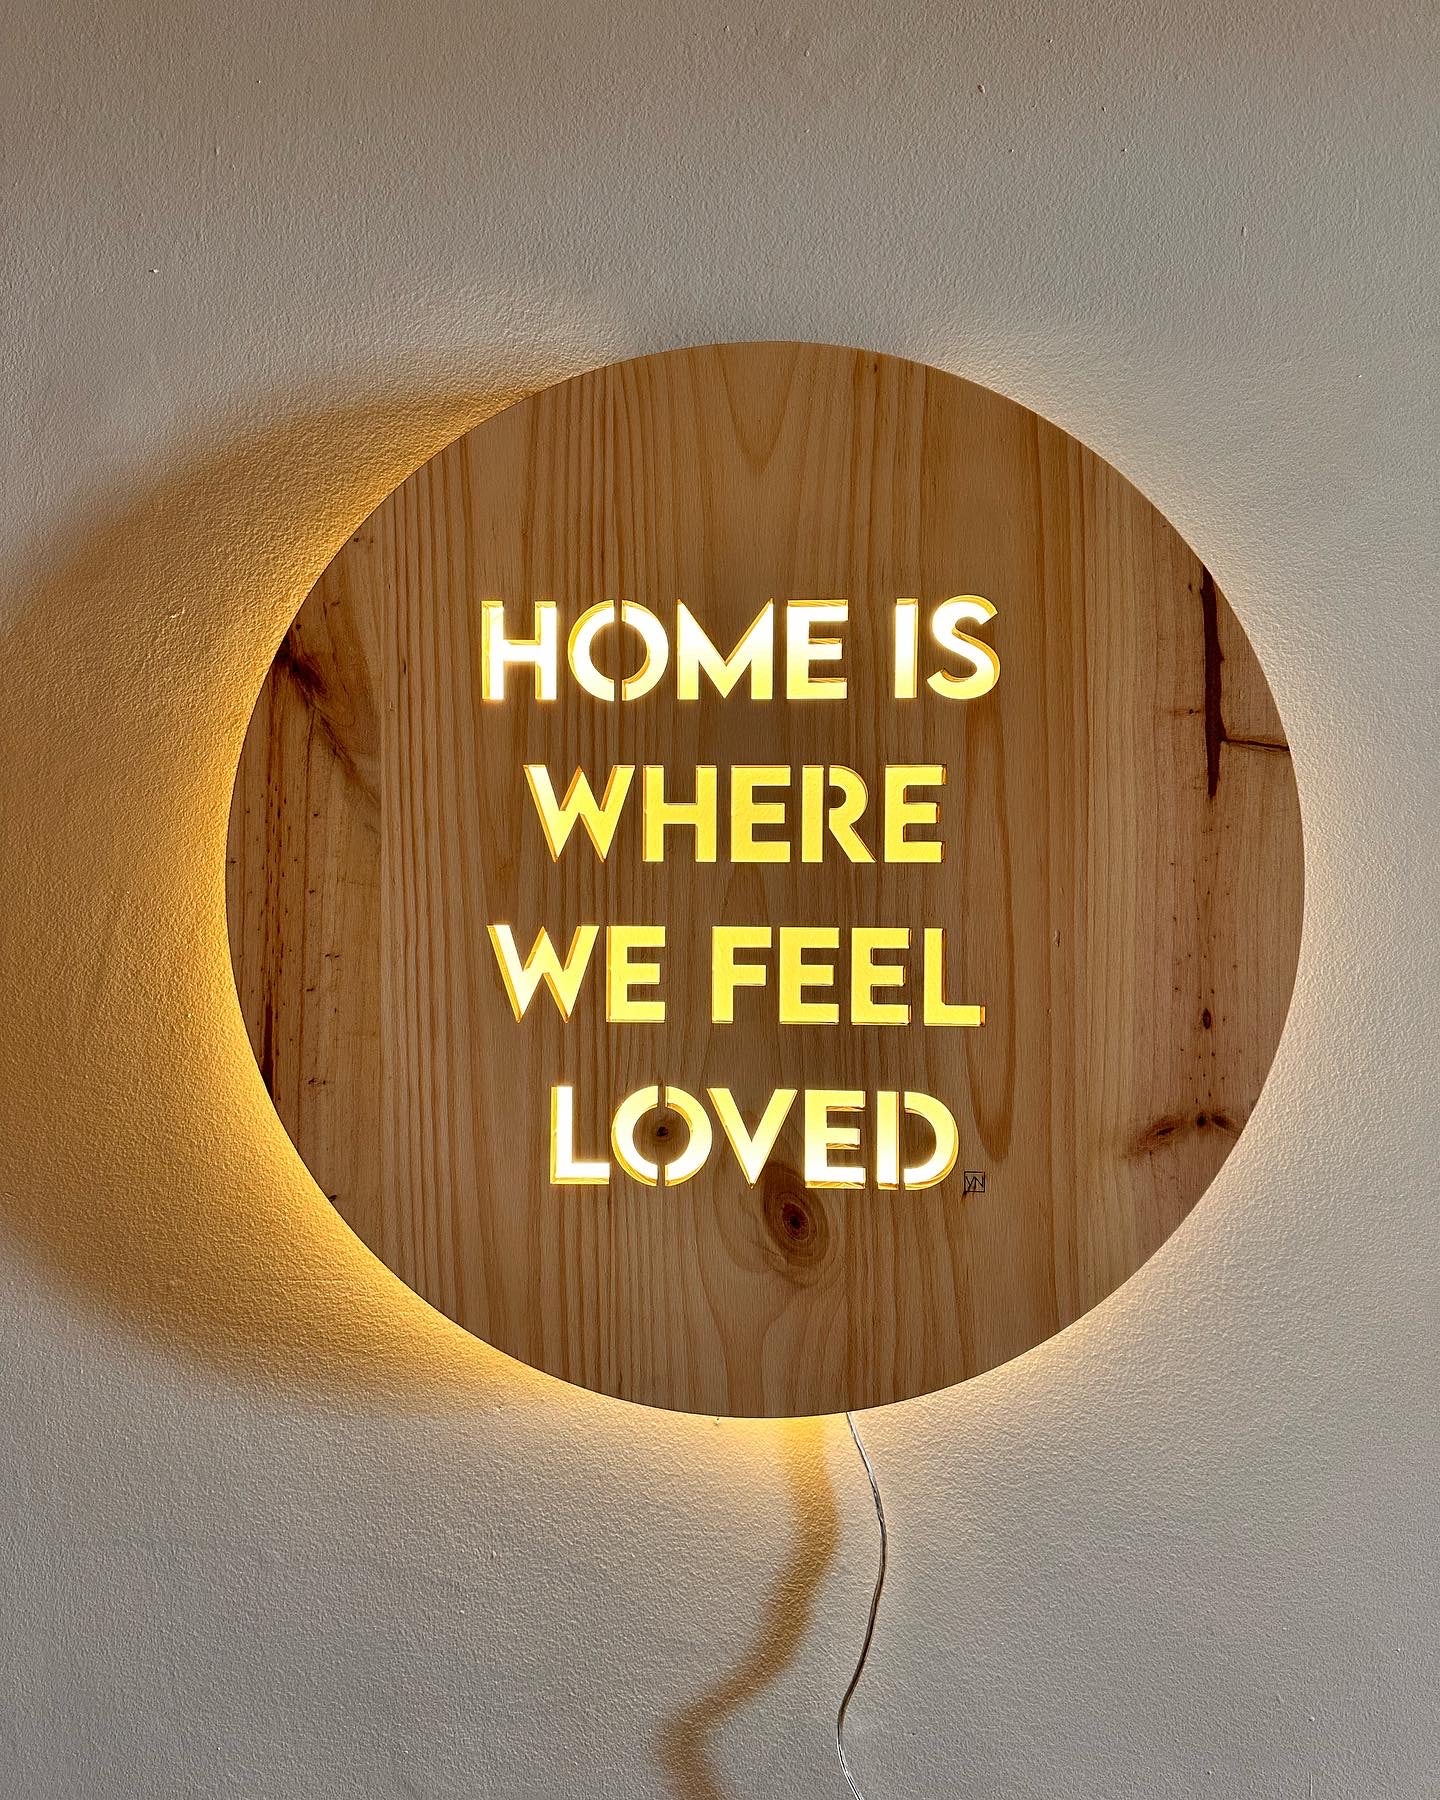 Home is where we feel loved